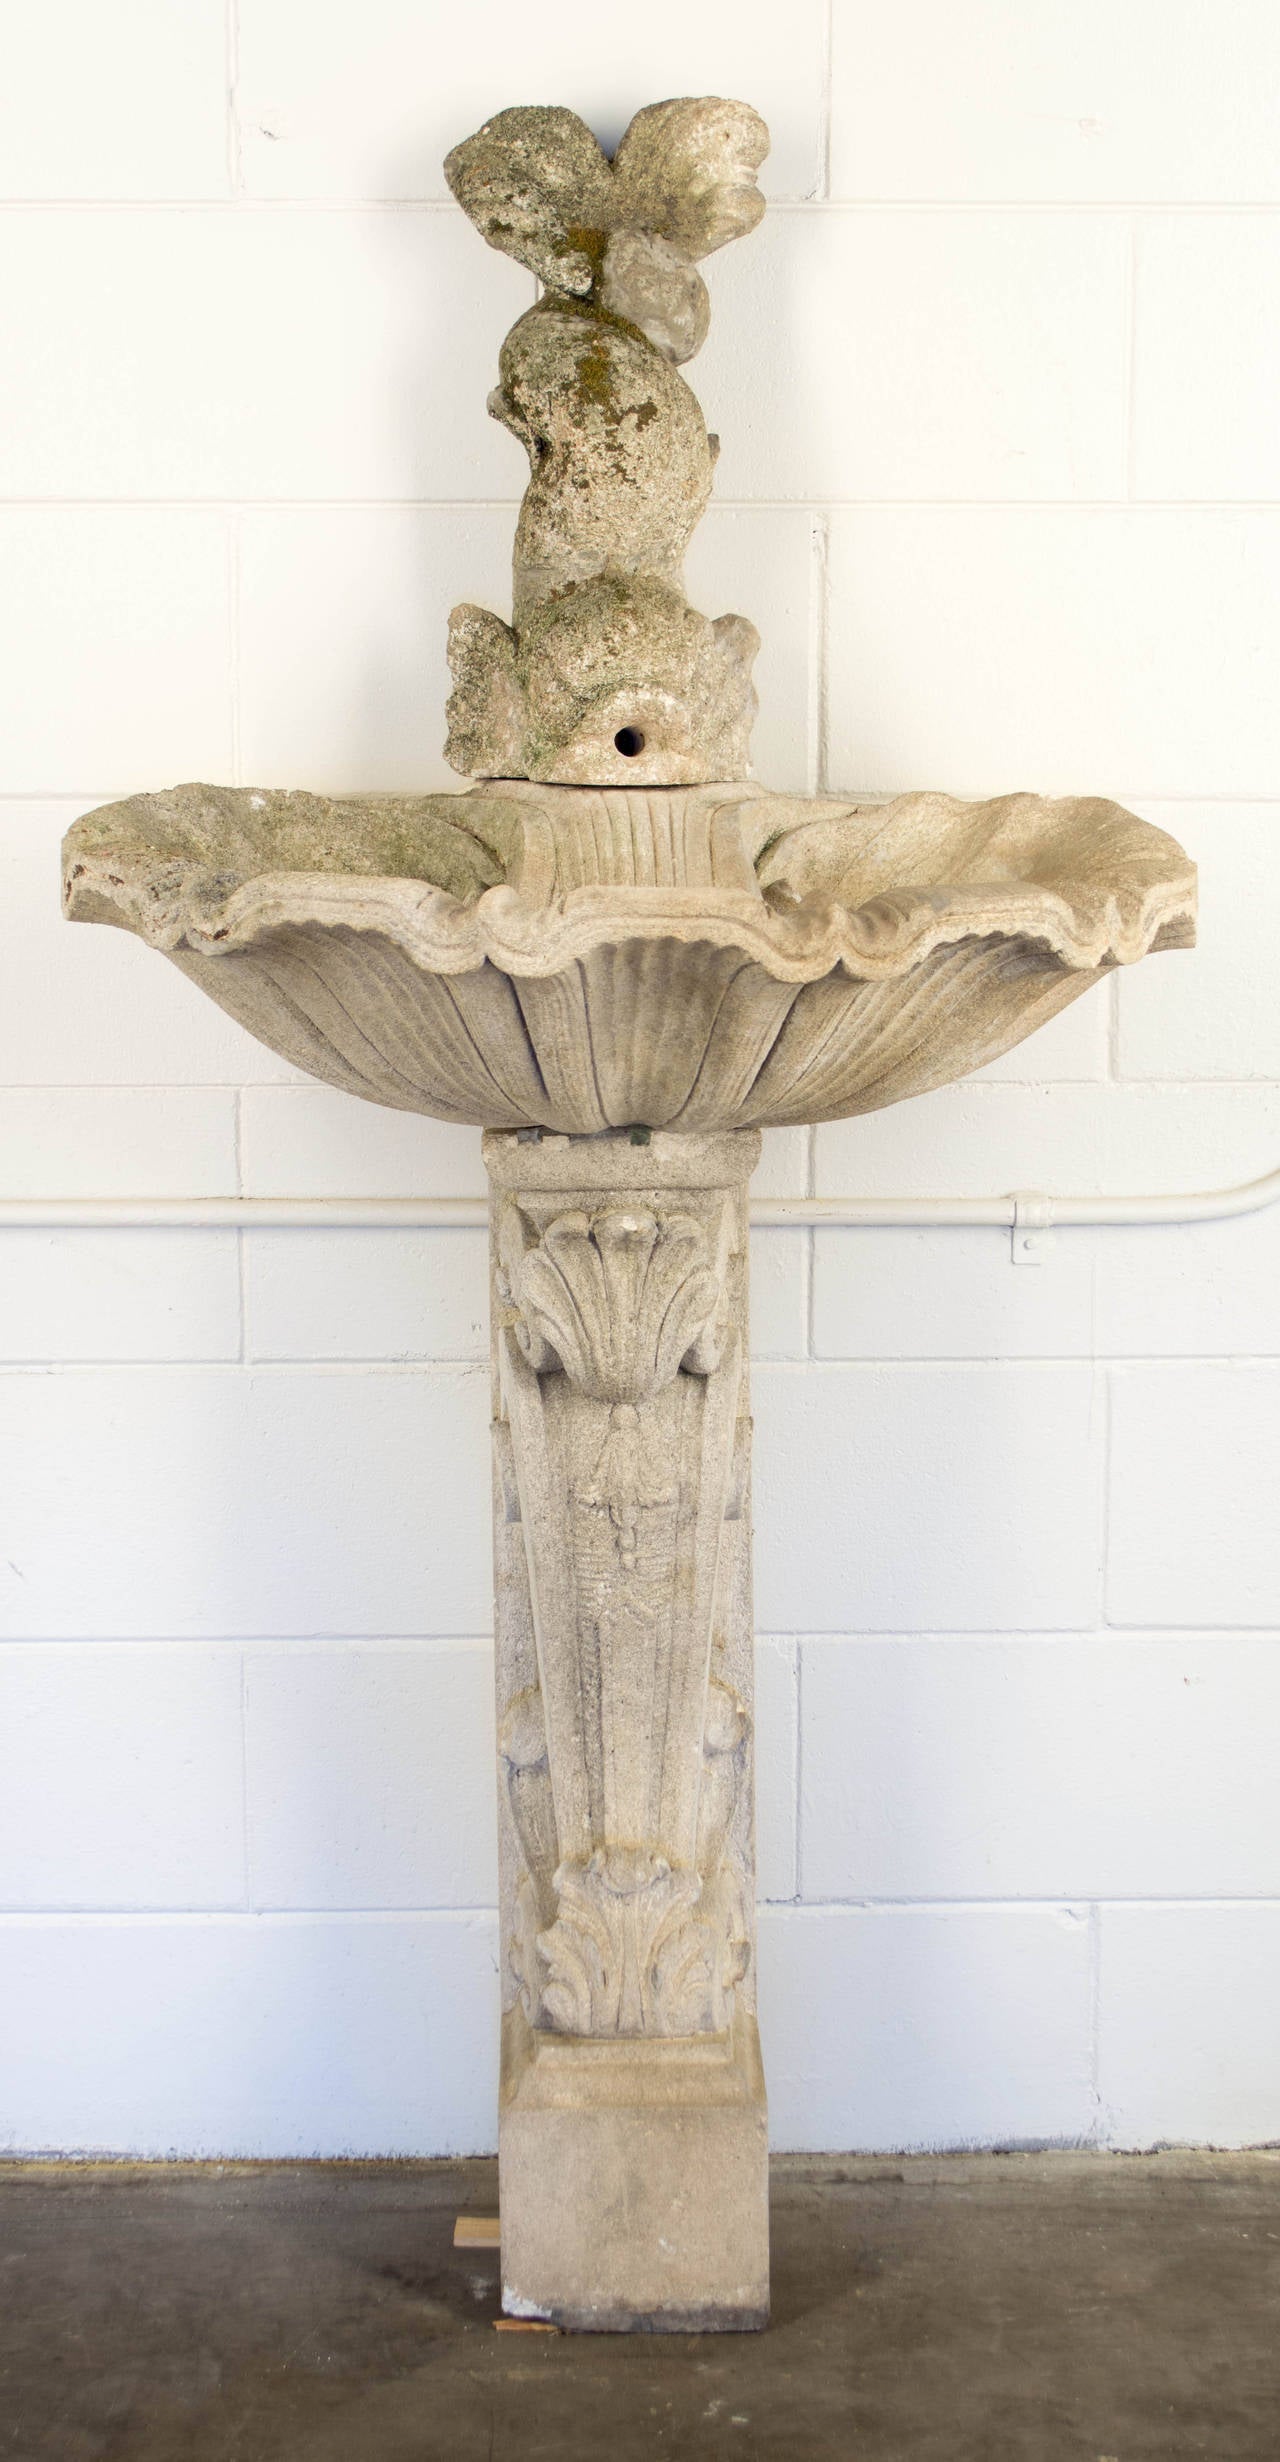 A country French stone fountain from Provence. In three parts with carved scrolls and acanthus leaves forming the pedestal base, a shell shaped basin and dolphin spout. Nice old patina and moss. As always, more photos available upon request. We have